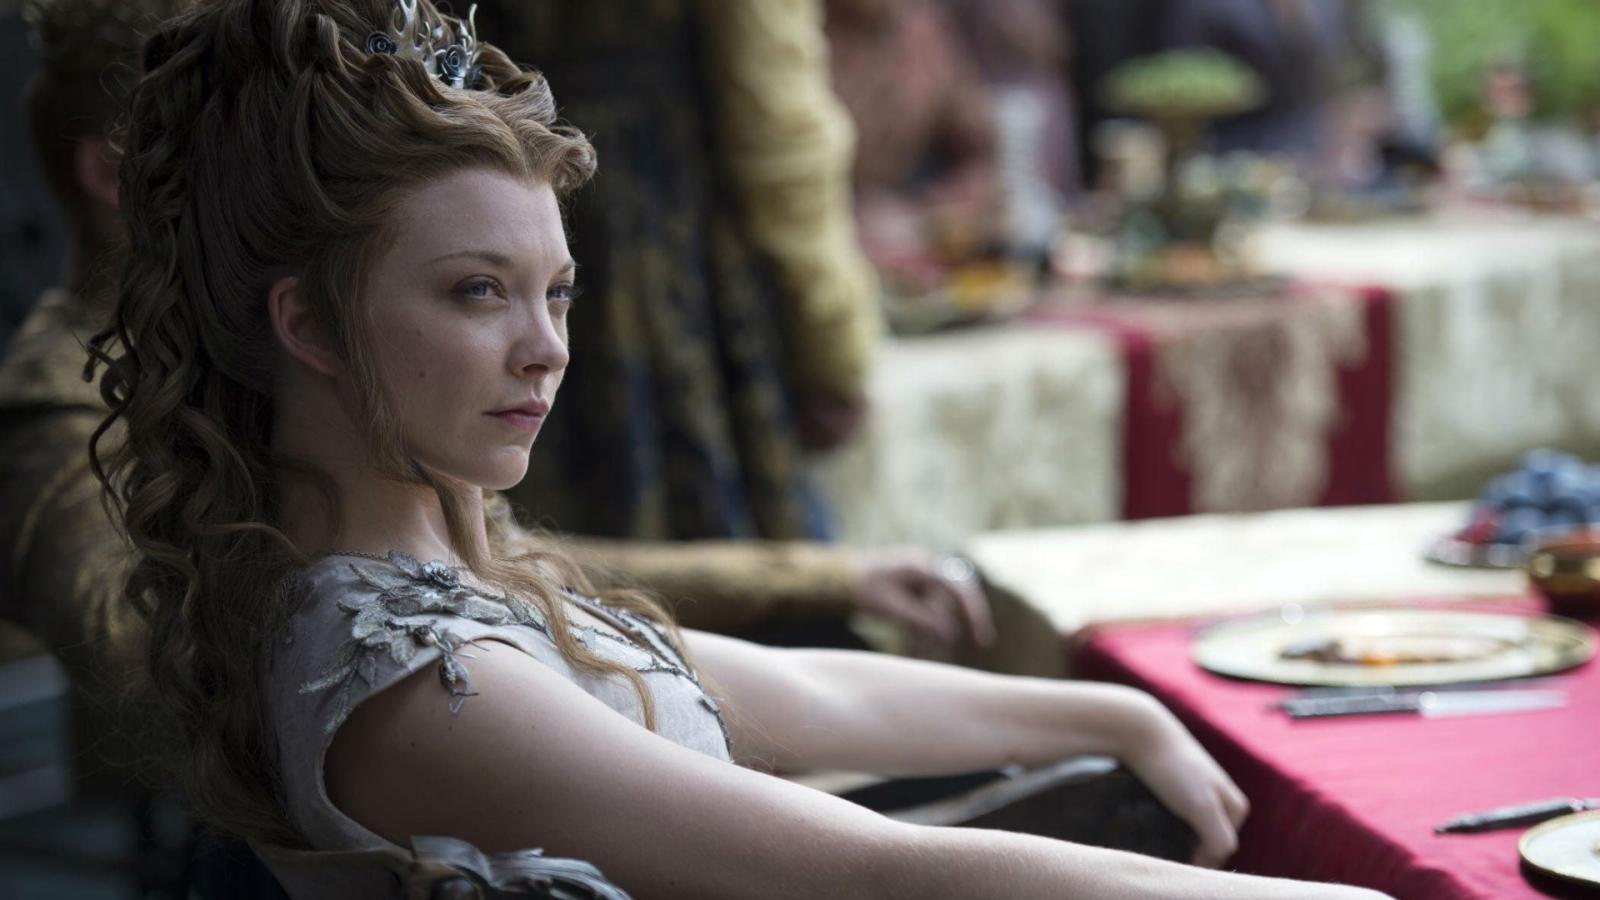 What Your Favorite Game of Thrones Character Says About You - image 12